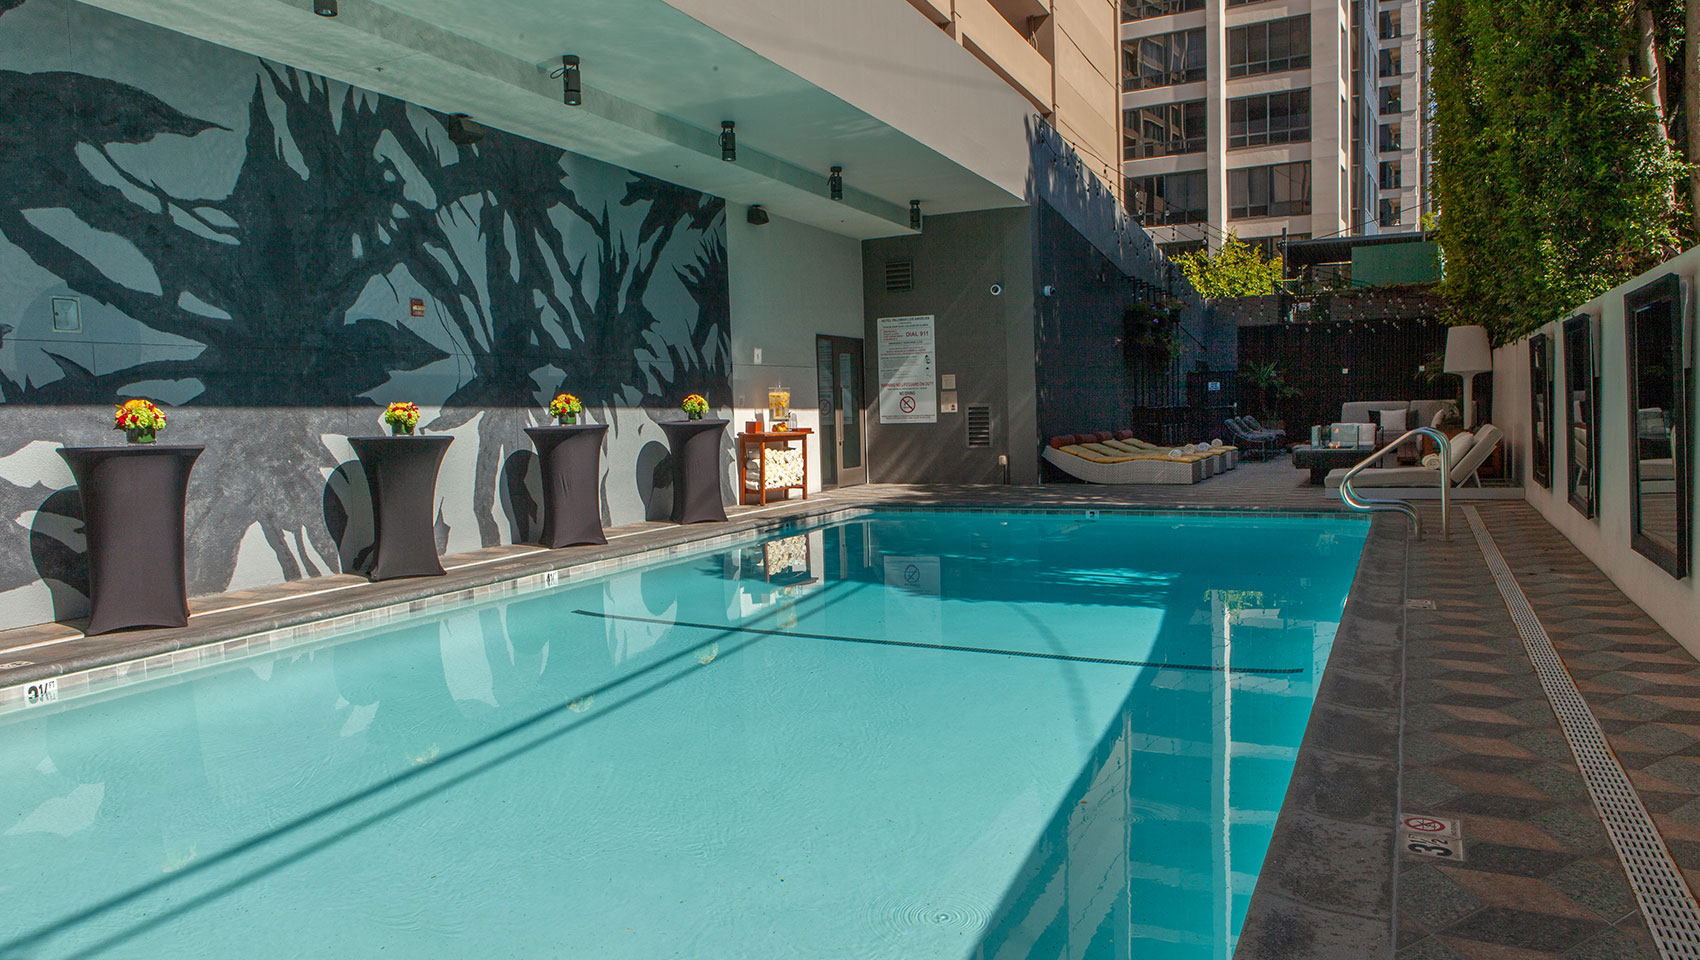 Image sourced from the Hotel Palomar at: https://www.hotelpalomar-beverlyhills.com/boutique-hotel-photos-beverly-hills/#pool